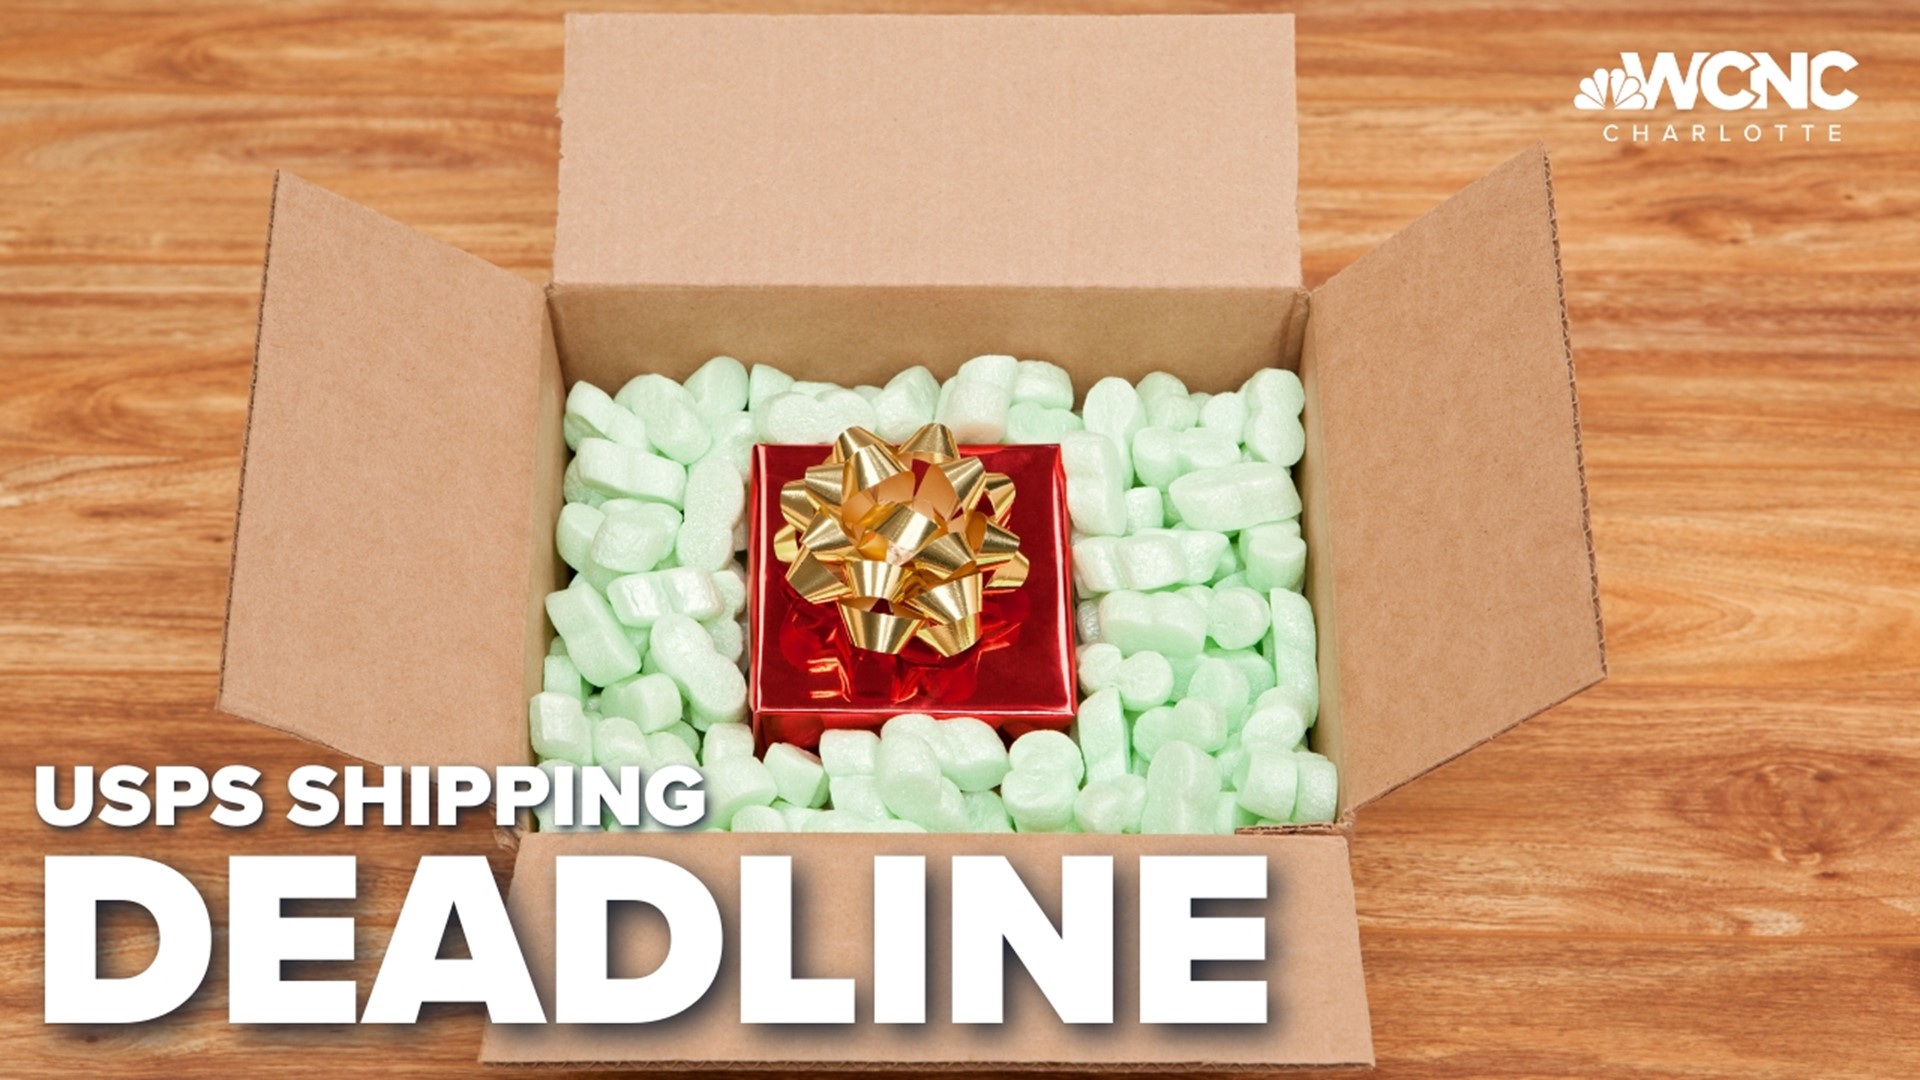 This Saturday is the deadline for using USPS retail ground and first class to get those gifts on loved ones' doorsteps by Christmas.